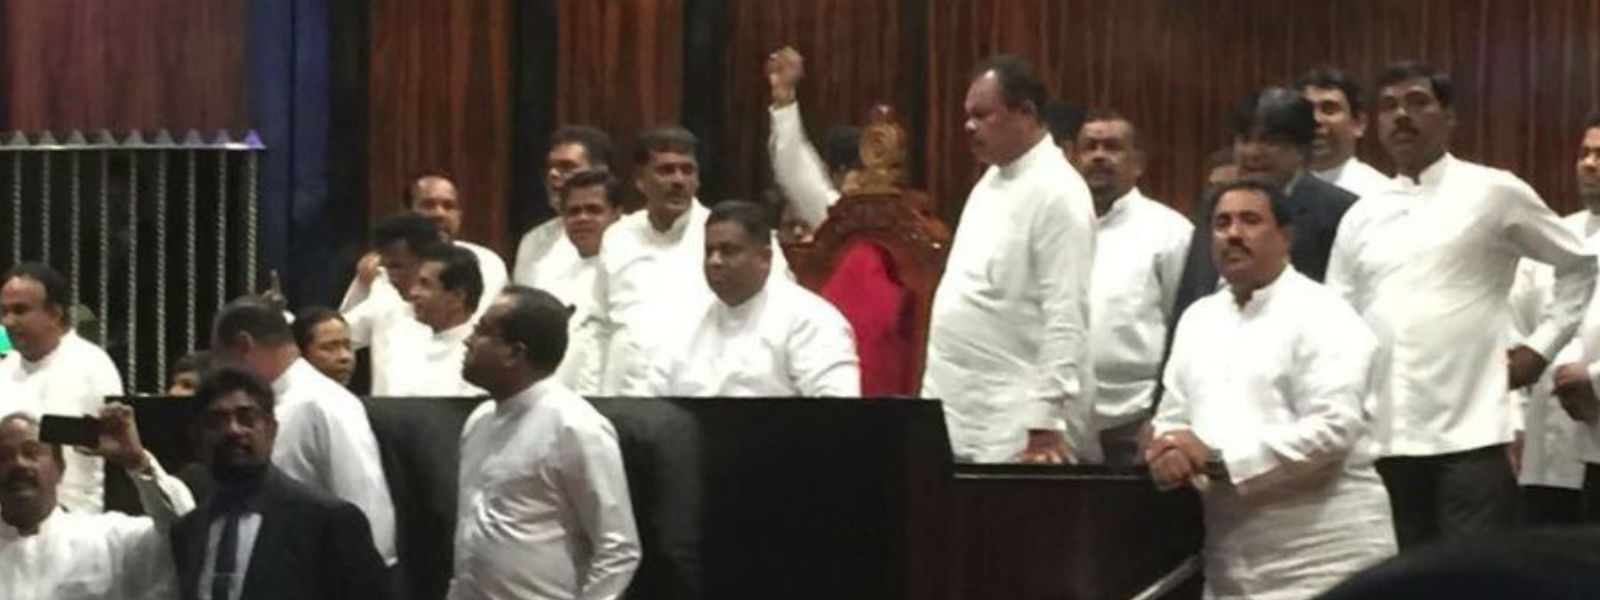 Rs.260K worth losses incurred by Parliament brawl